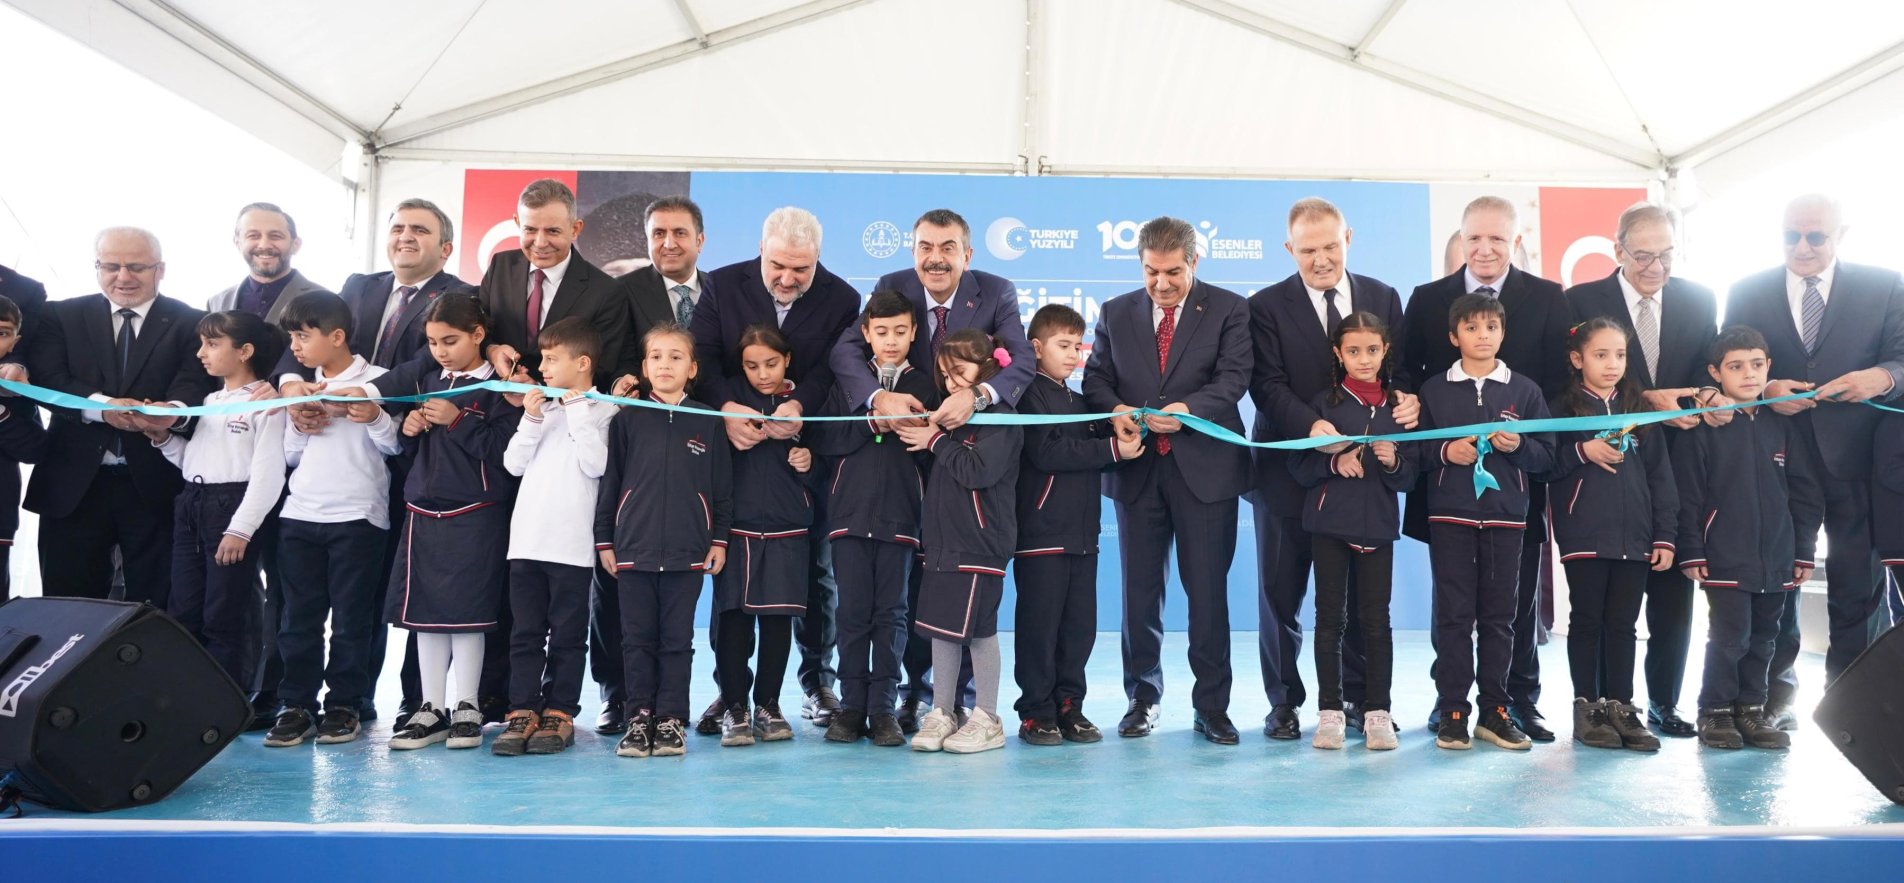 MINISTER TEKİN ATTENDS THE MASS OPENING CEREMONY OF THE EDUCATION FACILITIES IN ESENLER